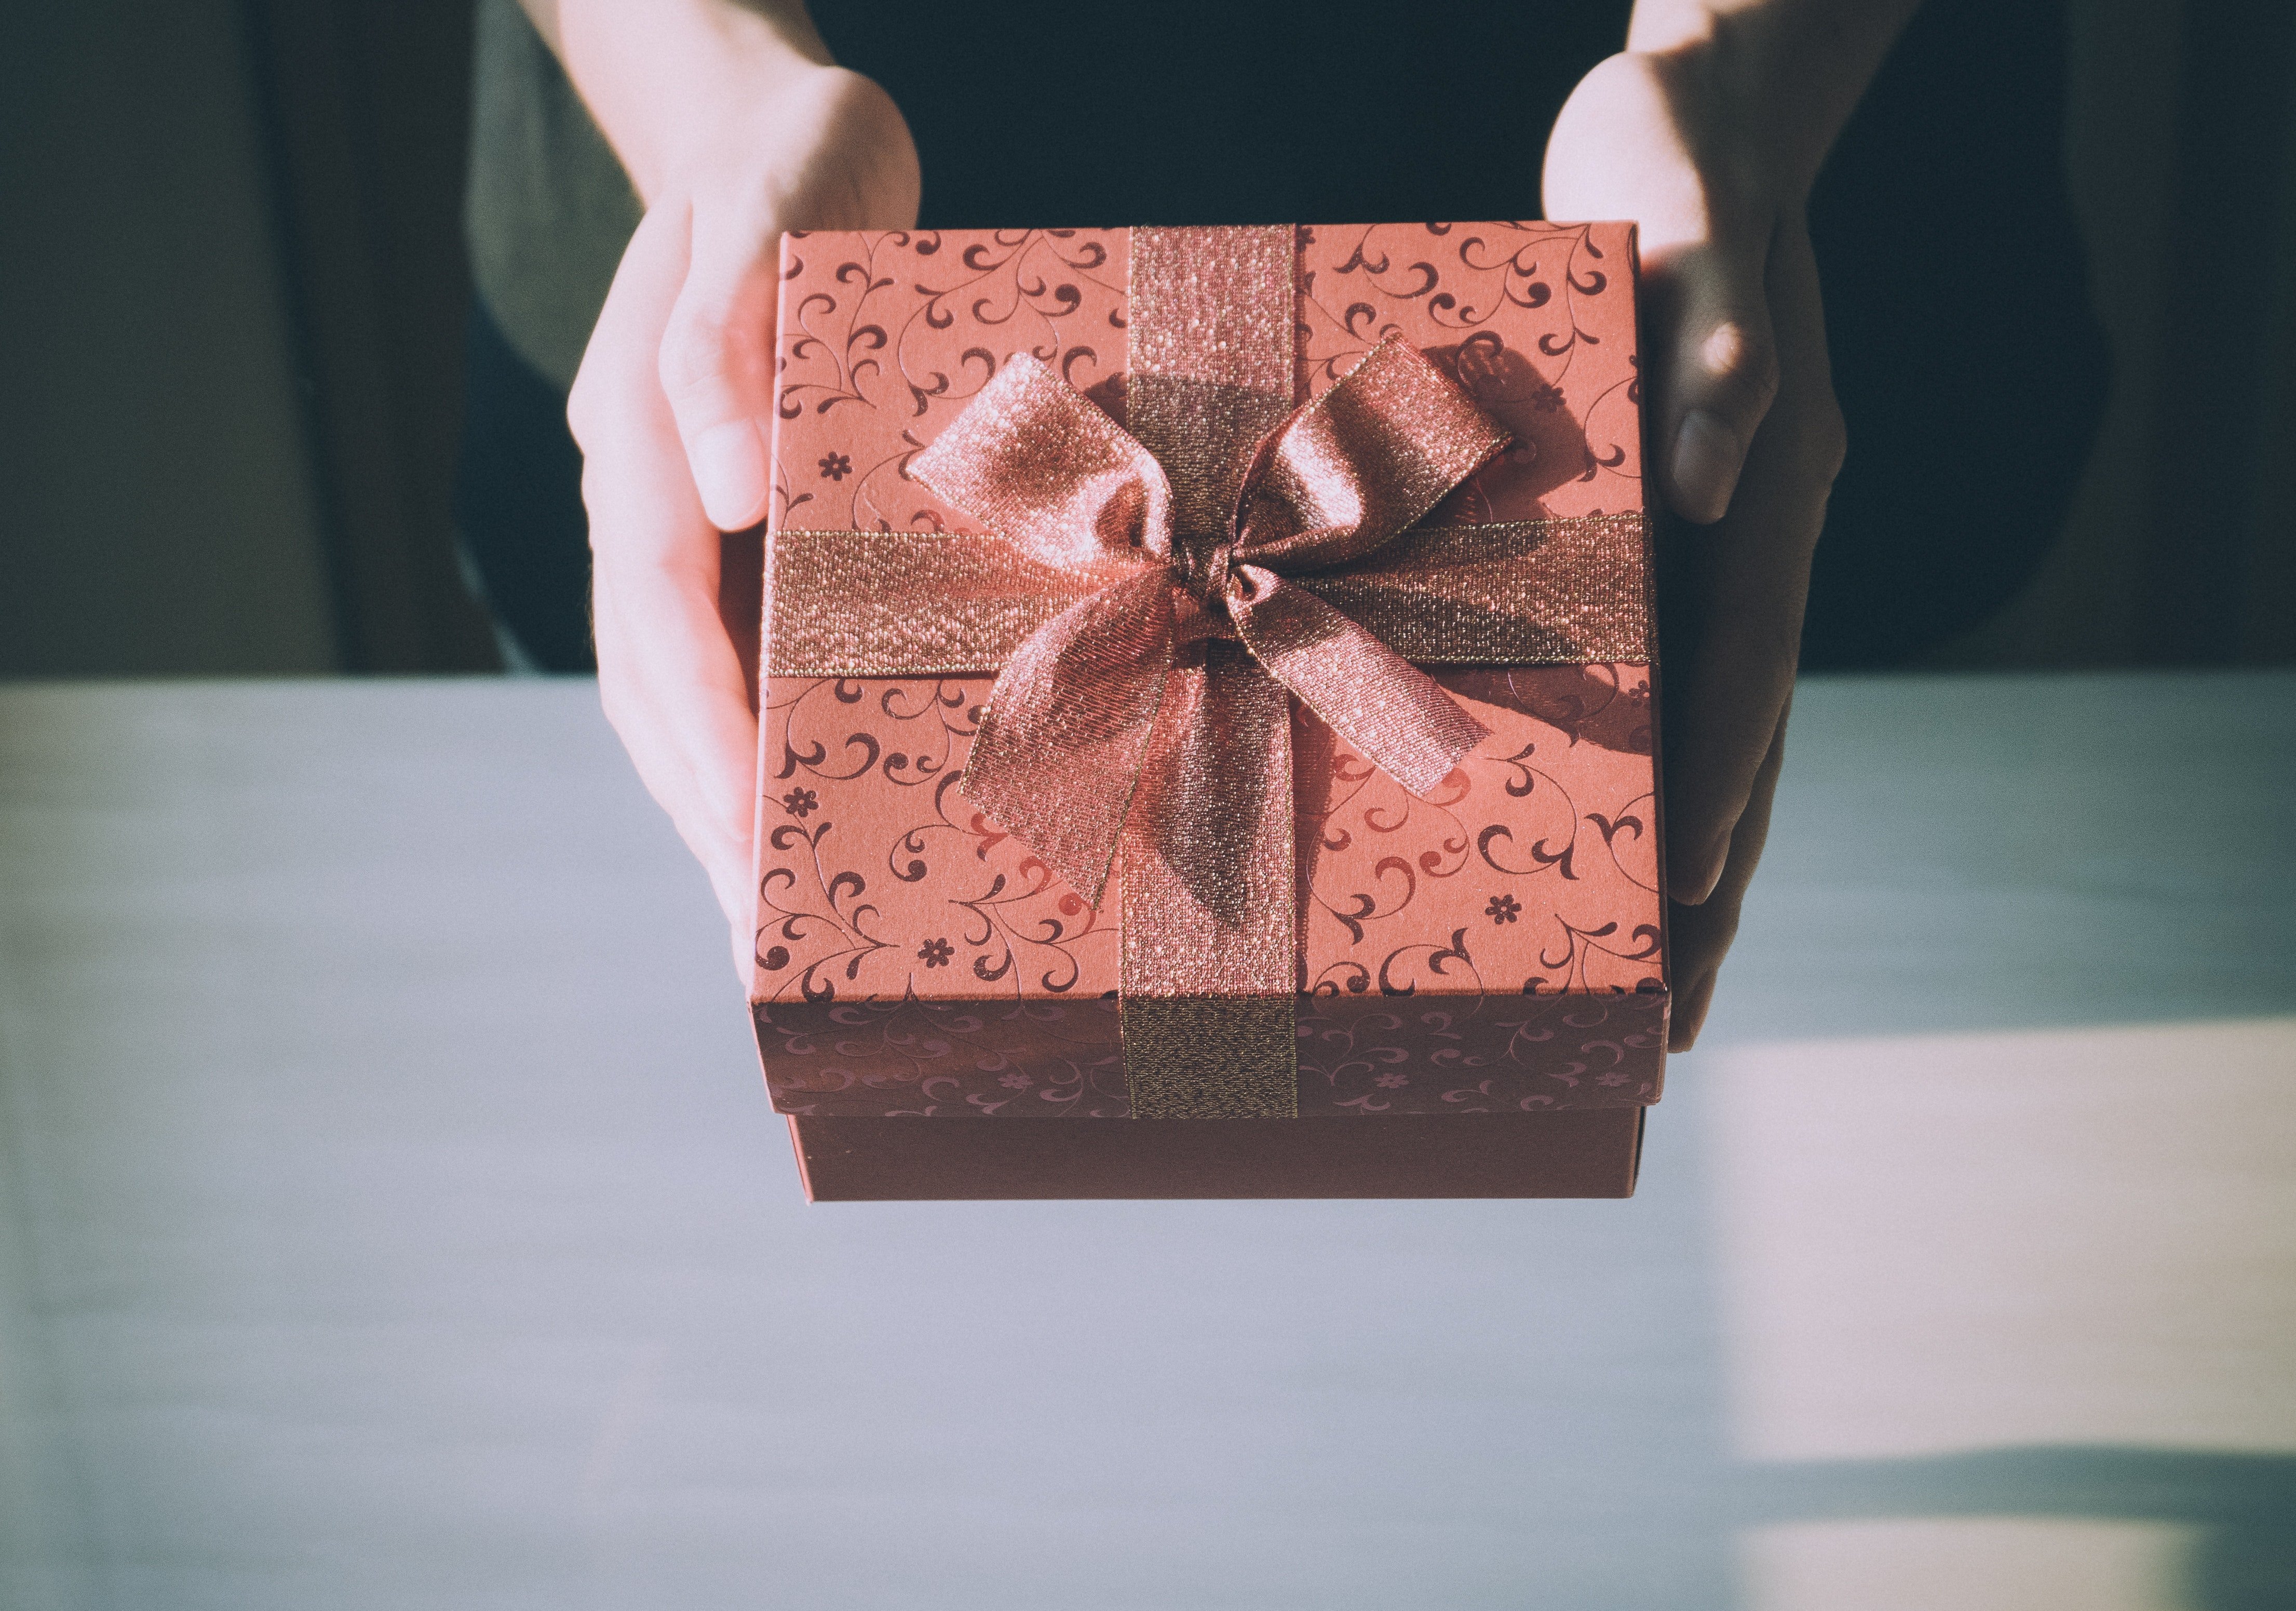 Brenda was determined to help the old man with his gift. | Source: Pexels